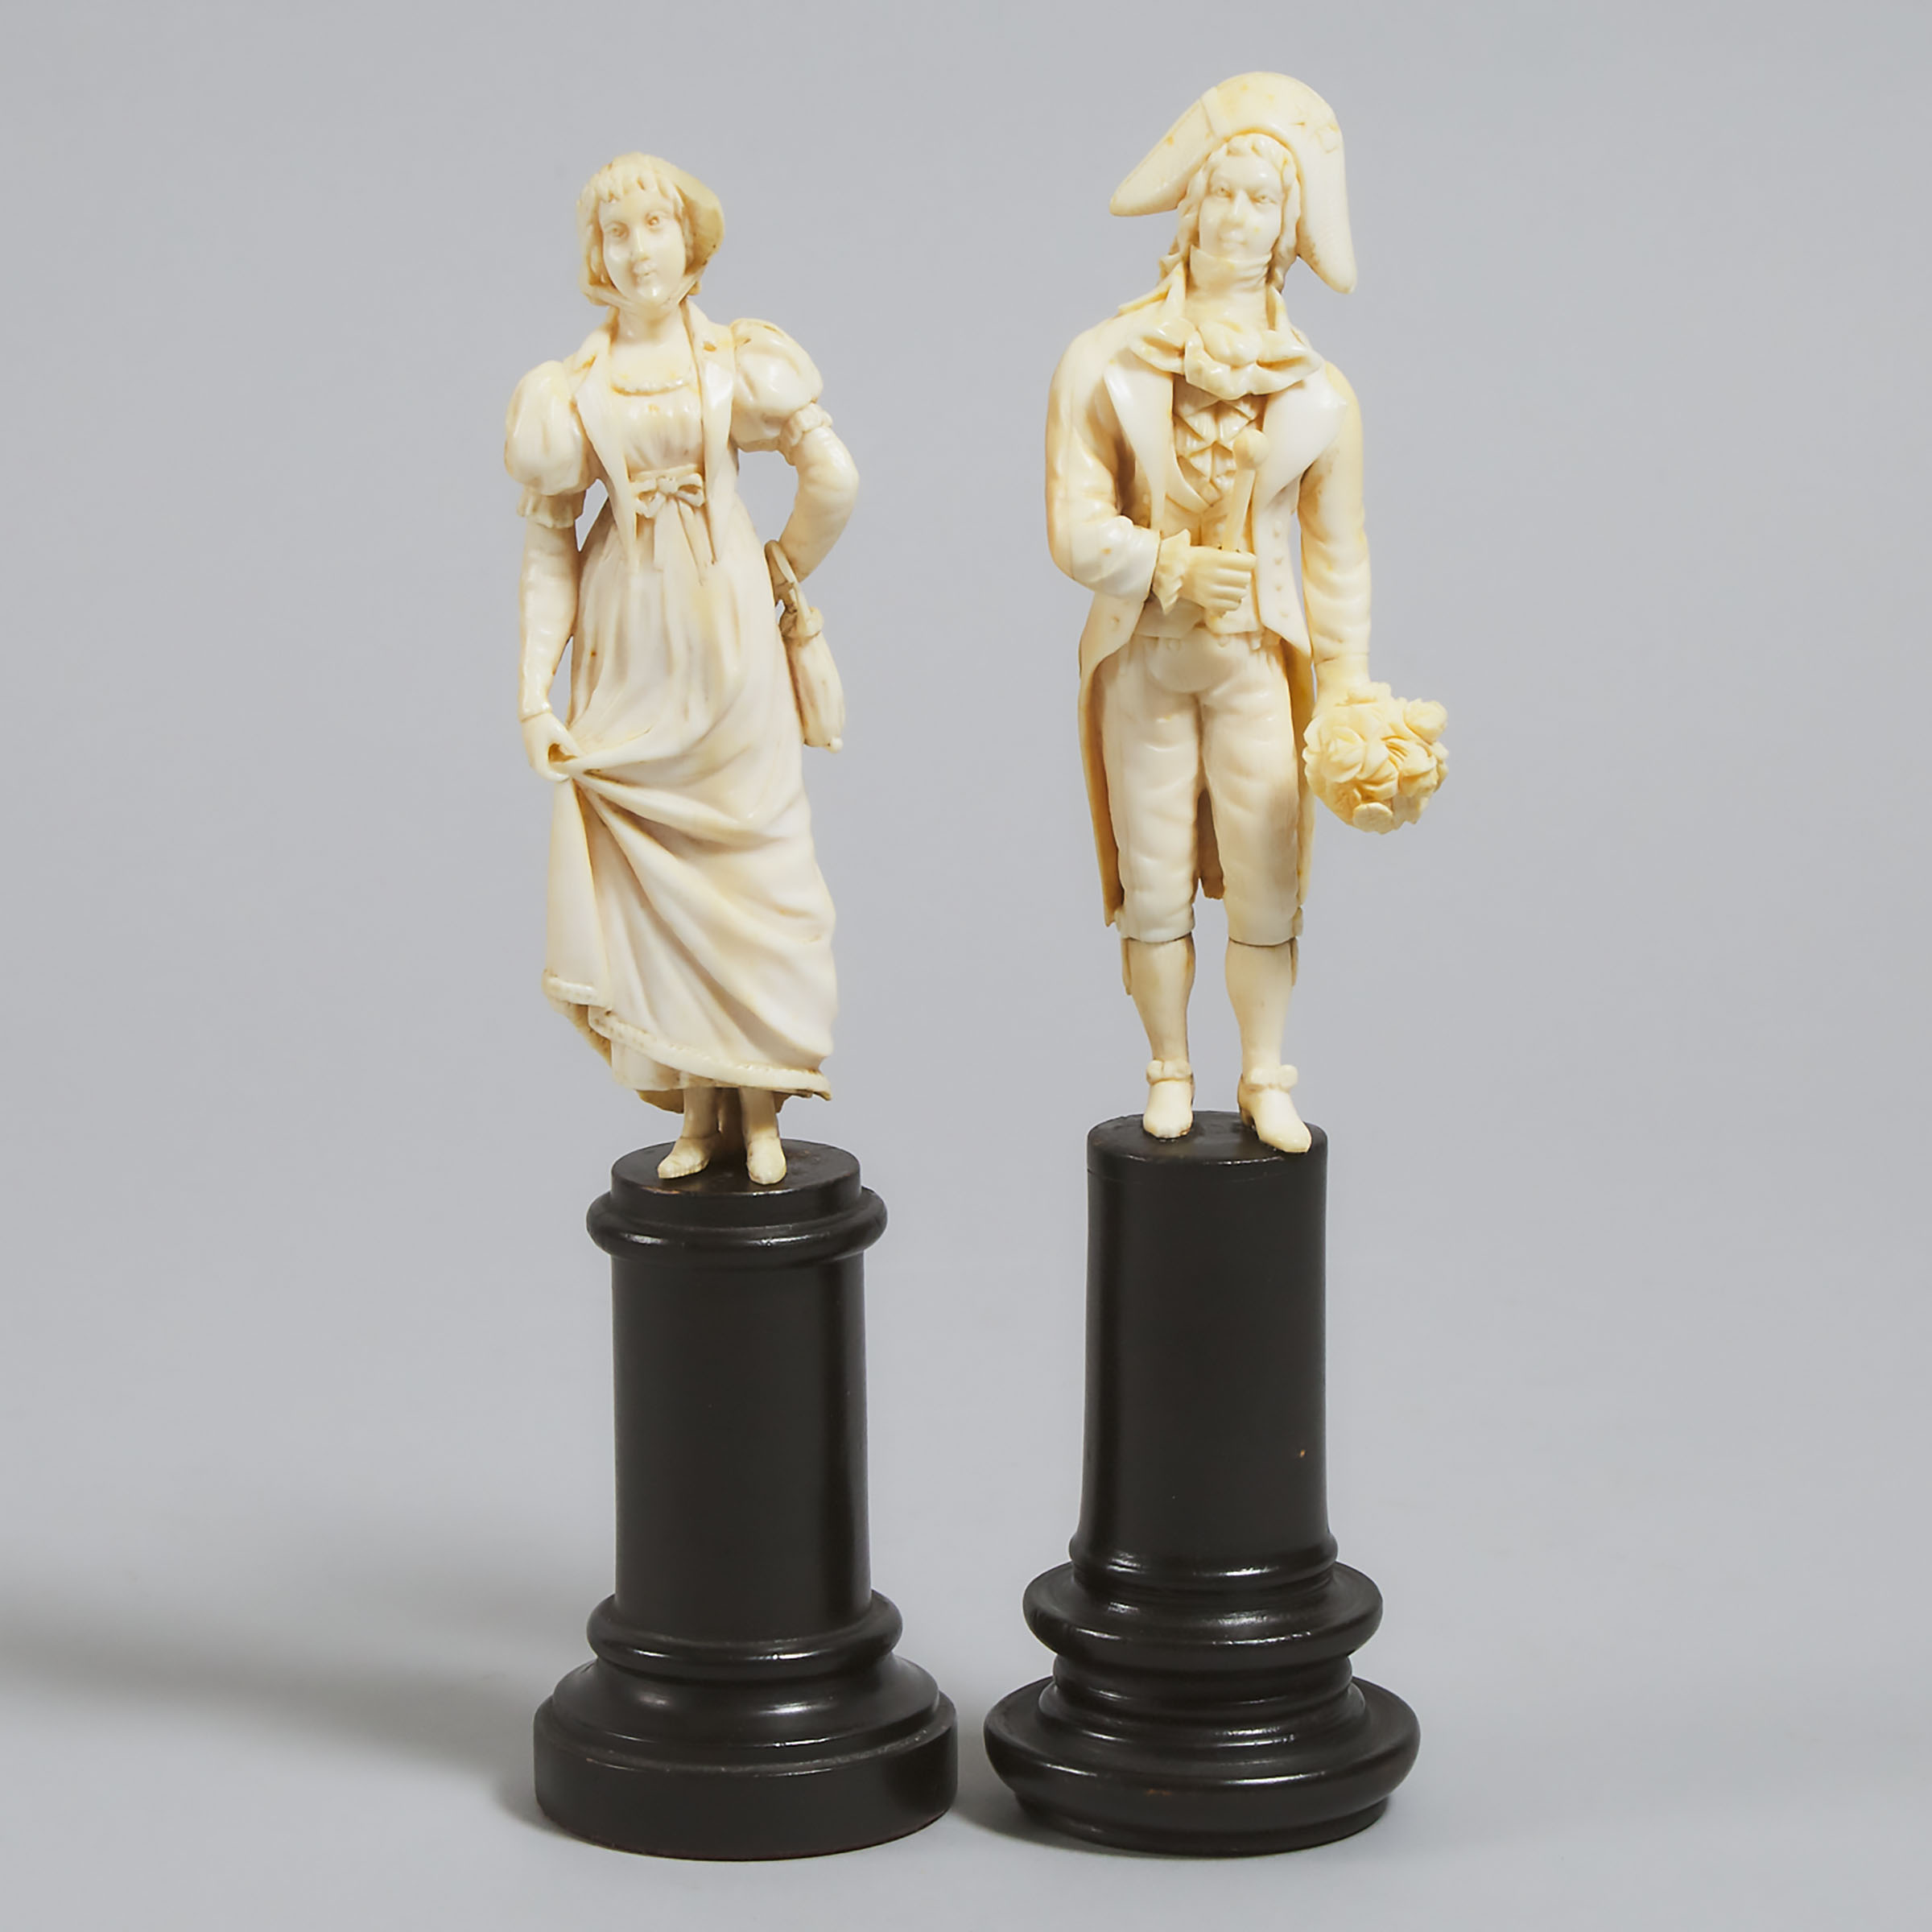 Pair of French Carved Ivory Courting Figures, probably Dieppe, 19th century